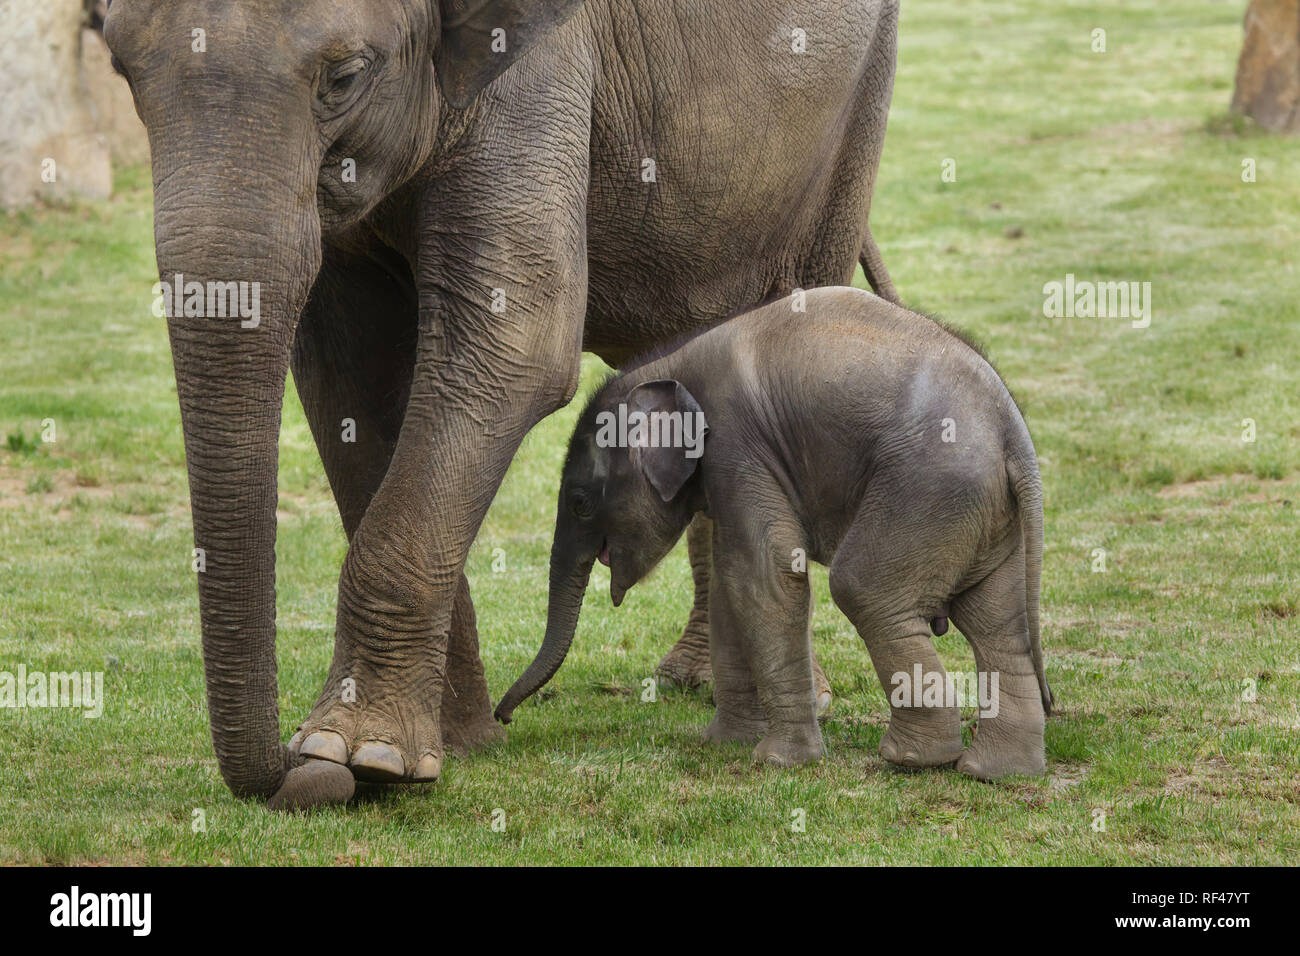 One-month-old Indian elephant (Elephas maximus indicus) named Maxmilian with his mother Janita at Prague Zoo, Czech Republic. The baby elephant was born on April 5, 2016, to the elephant female Janita as the first baby elephant not only born but also conceived at Prague Zoo. Stock Photo